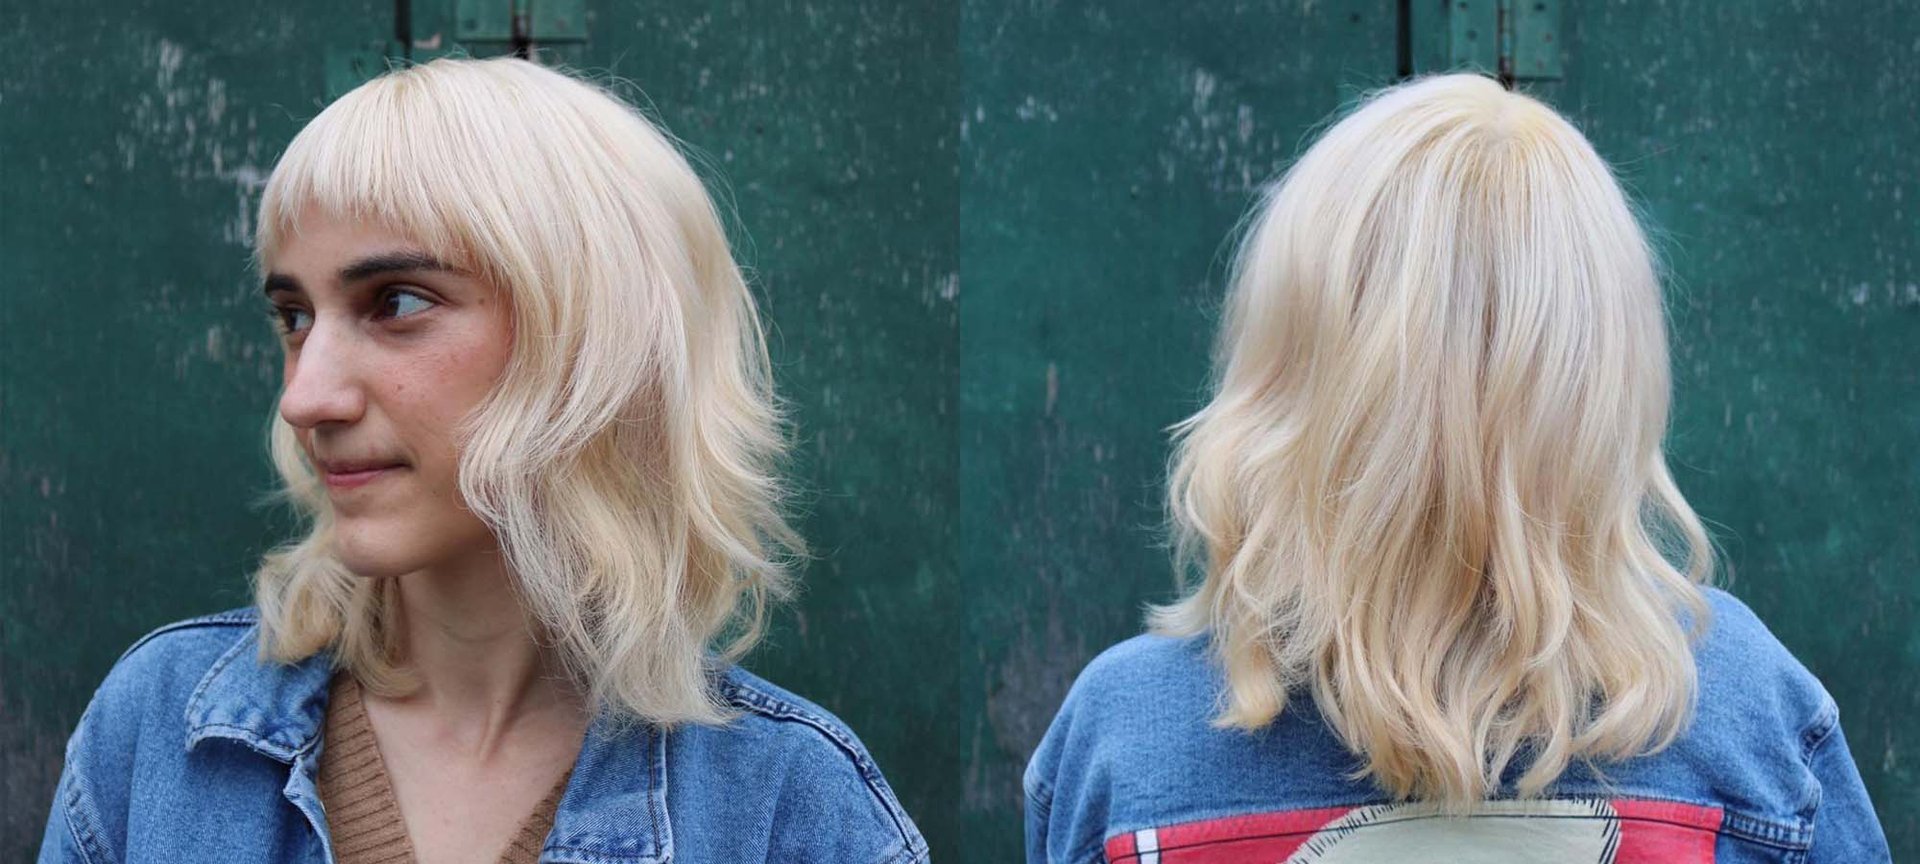 1. "Baby Blonde Hair Color: The Perfect Shade for Your Little One" - wide 5